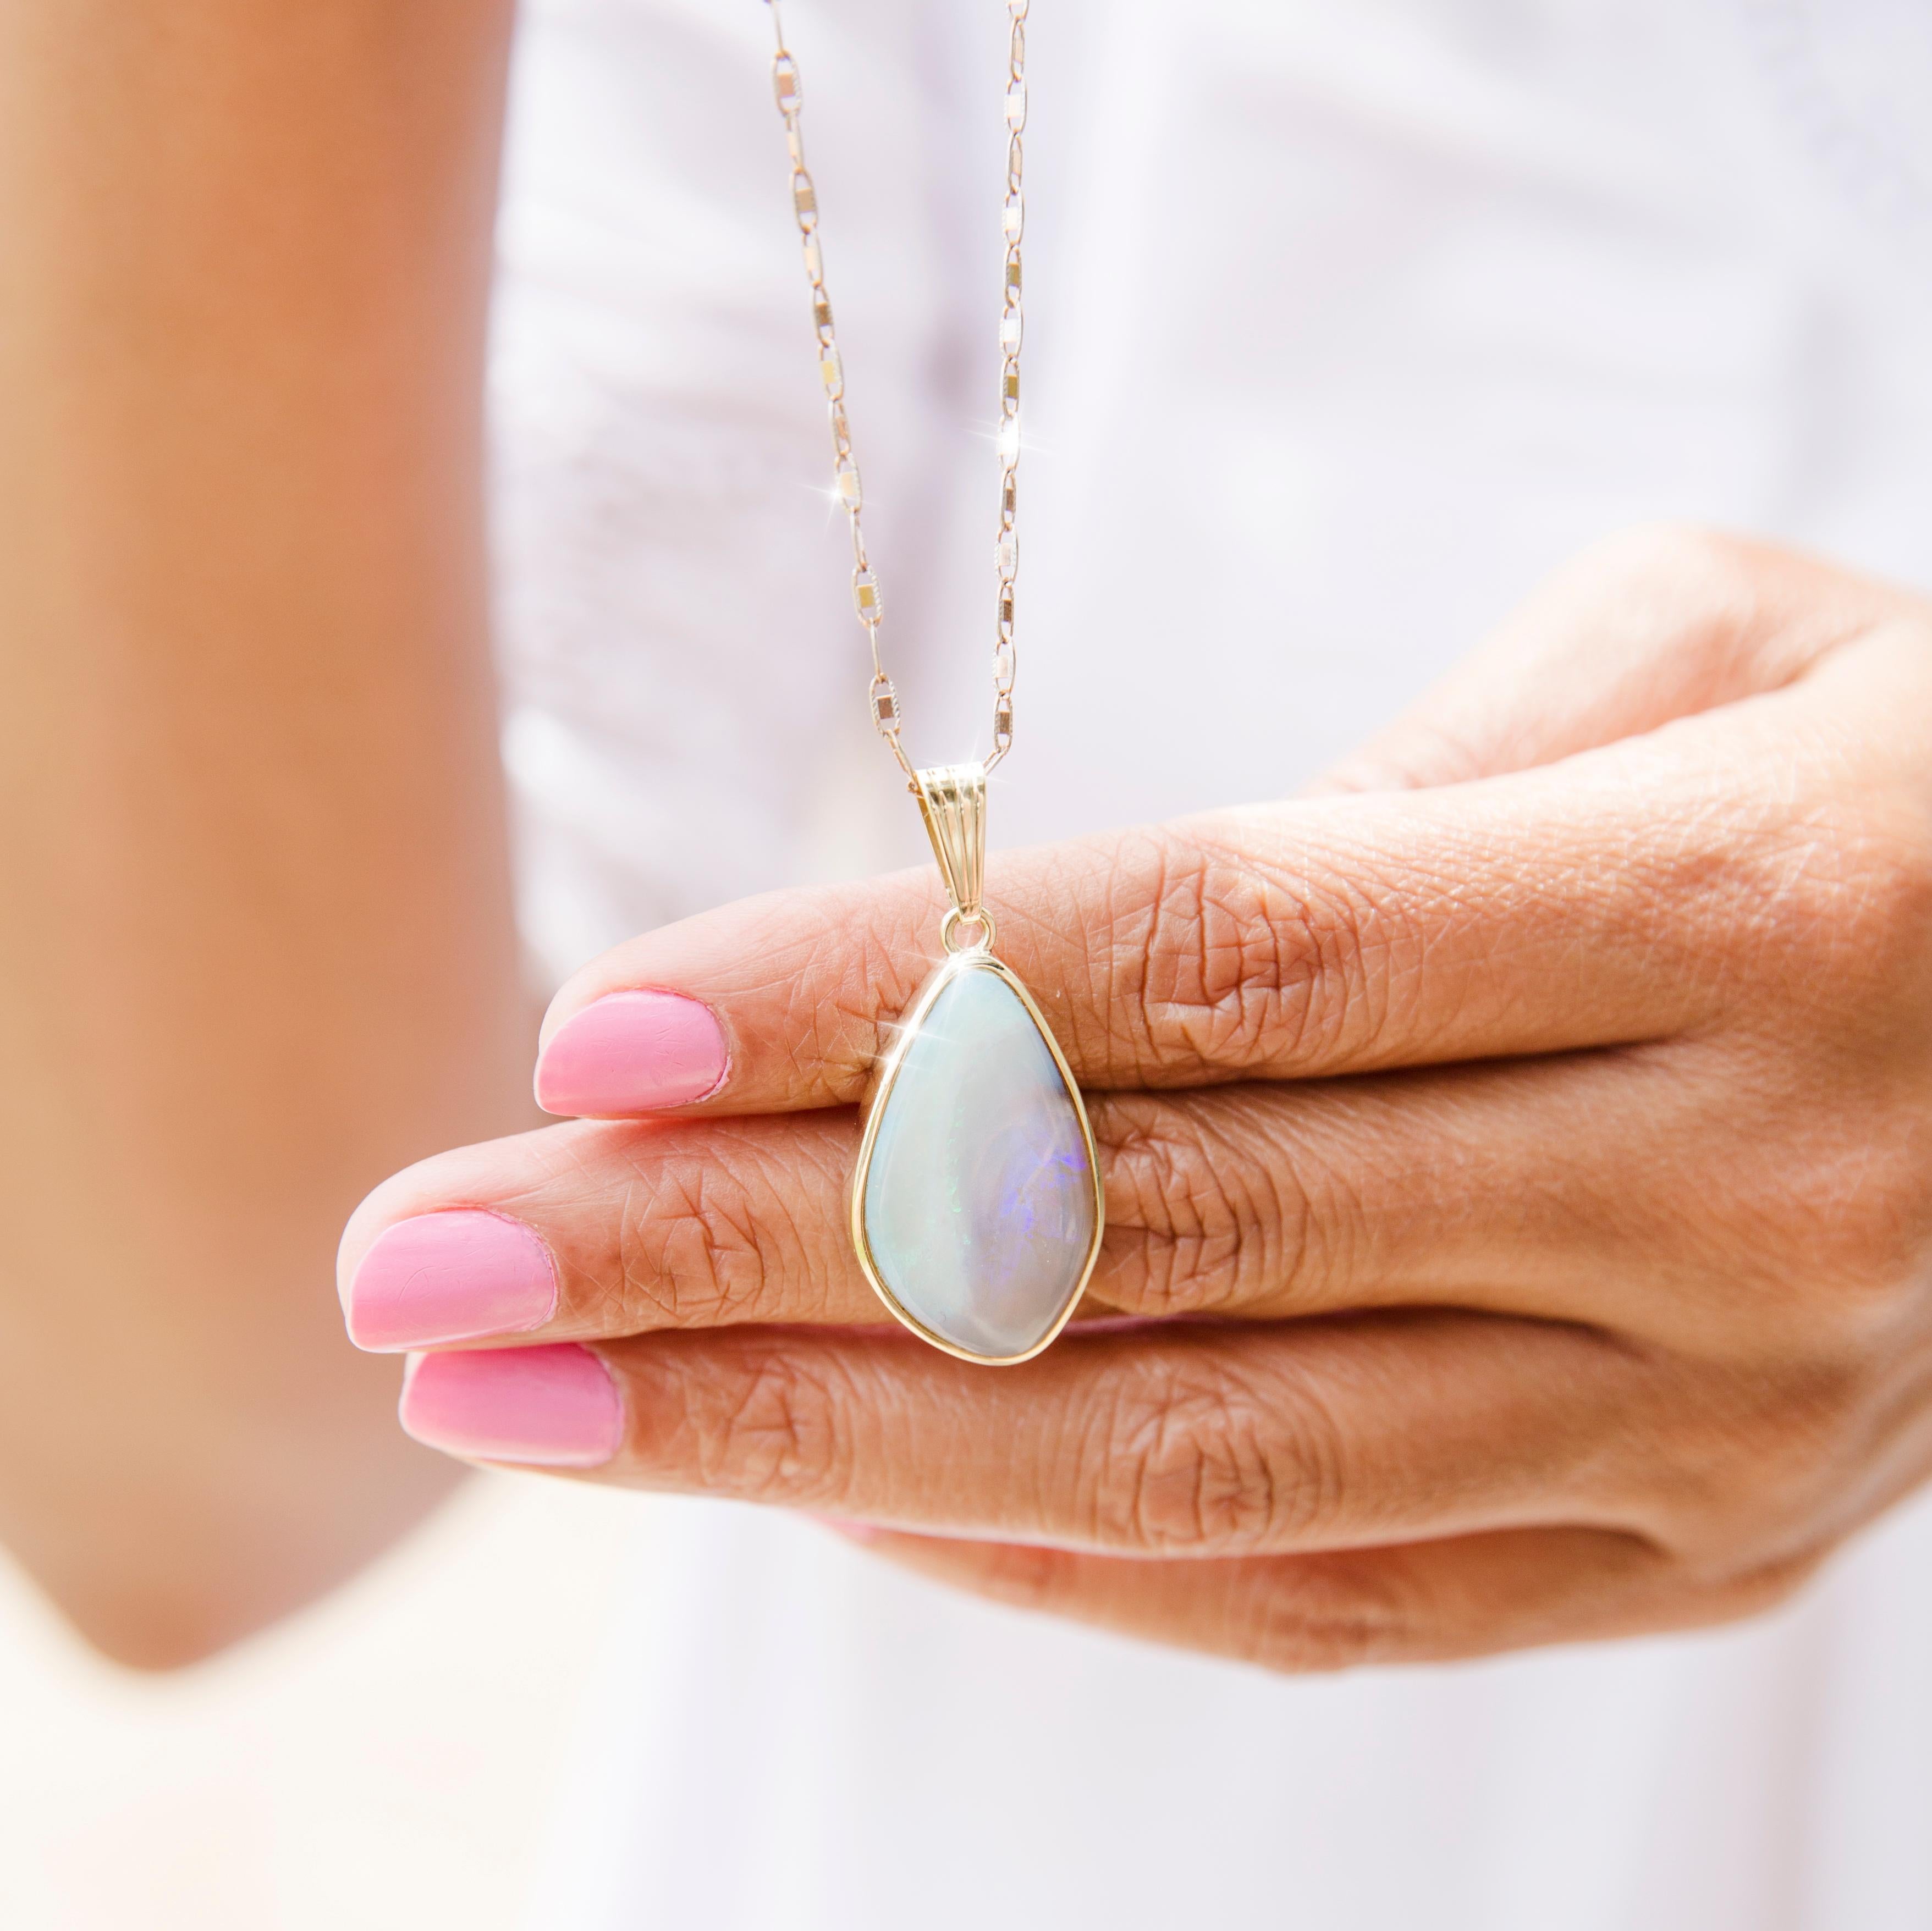 Lovingly crafted in 18 carat yellow gold, this charming vintage pendant features an enchanting free form triangular dark solid opal. The left side is of a light milky green colour with patches of red on the left, and the right side is a dark crystal